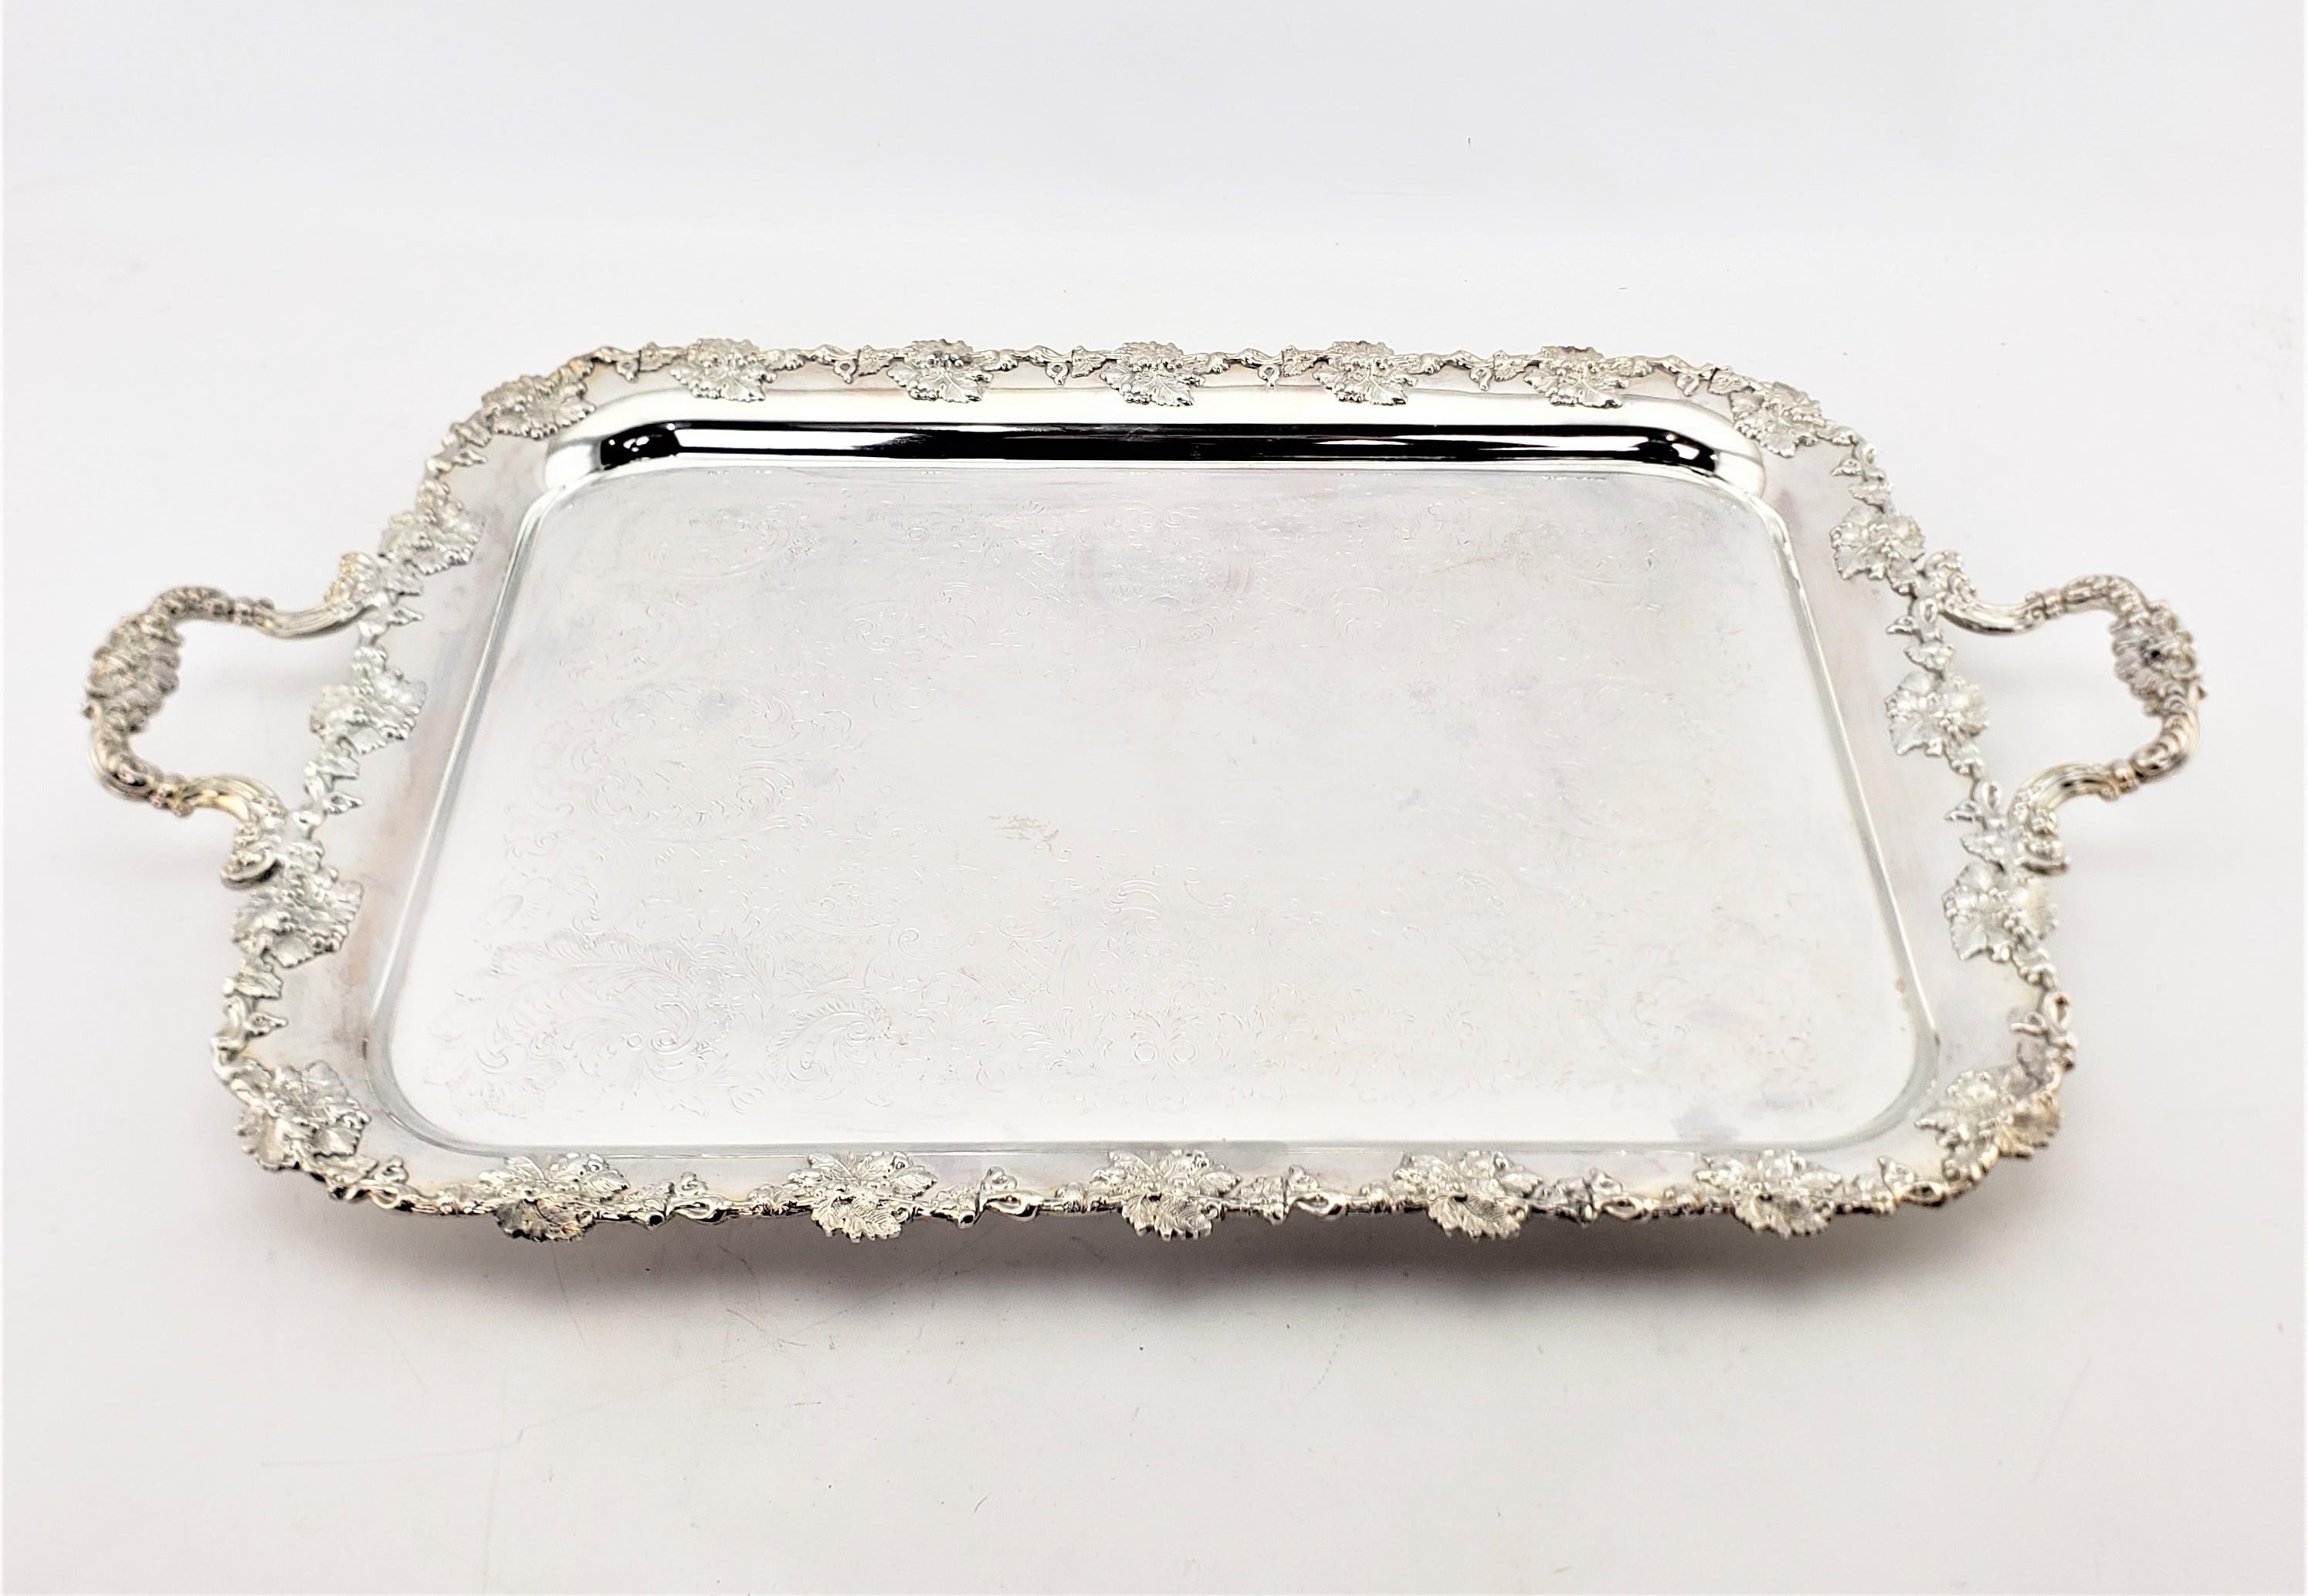 Antique Barker-Ellis Silver Plated Serving Tray with Berry & Leaf Decoration In Good Condition For Sale In Hamilton, Ontario